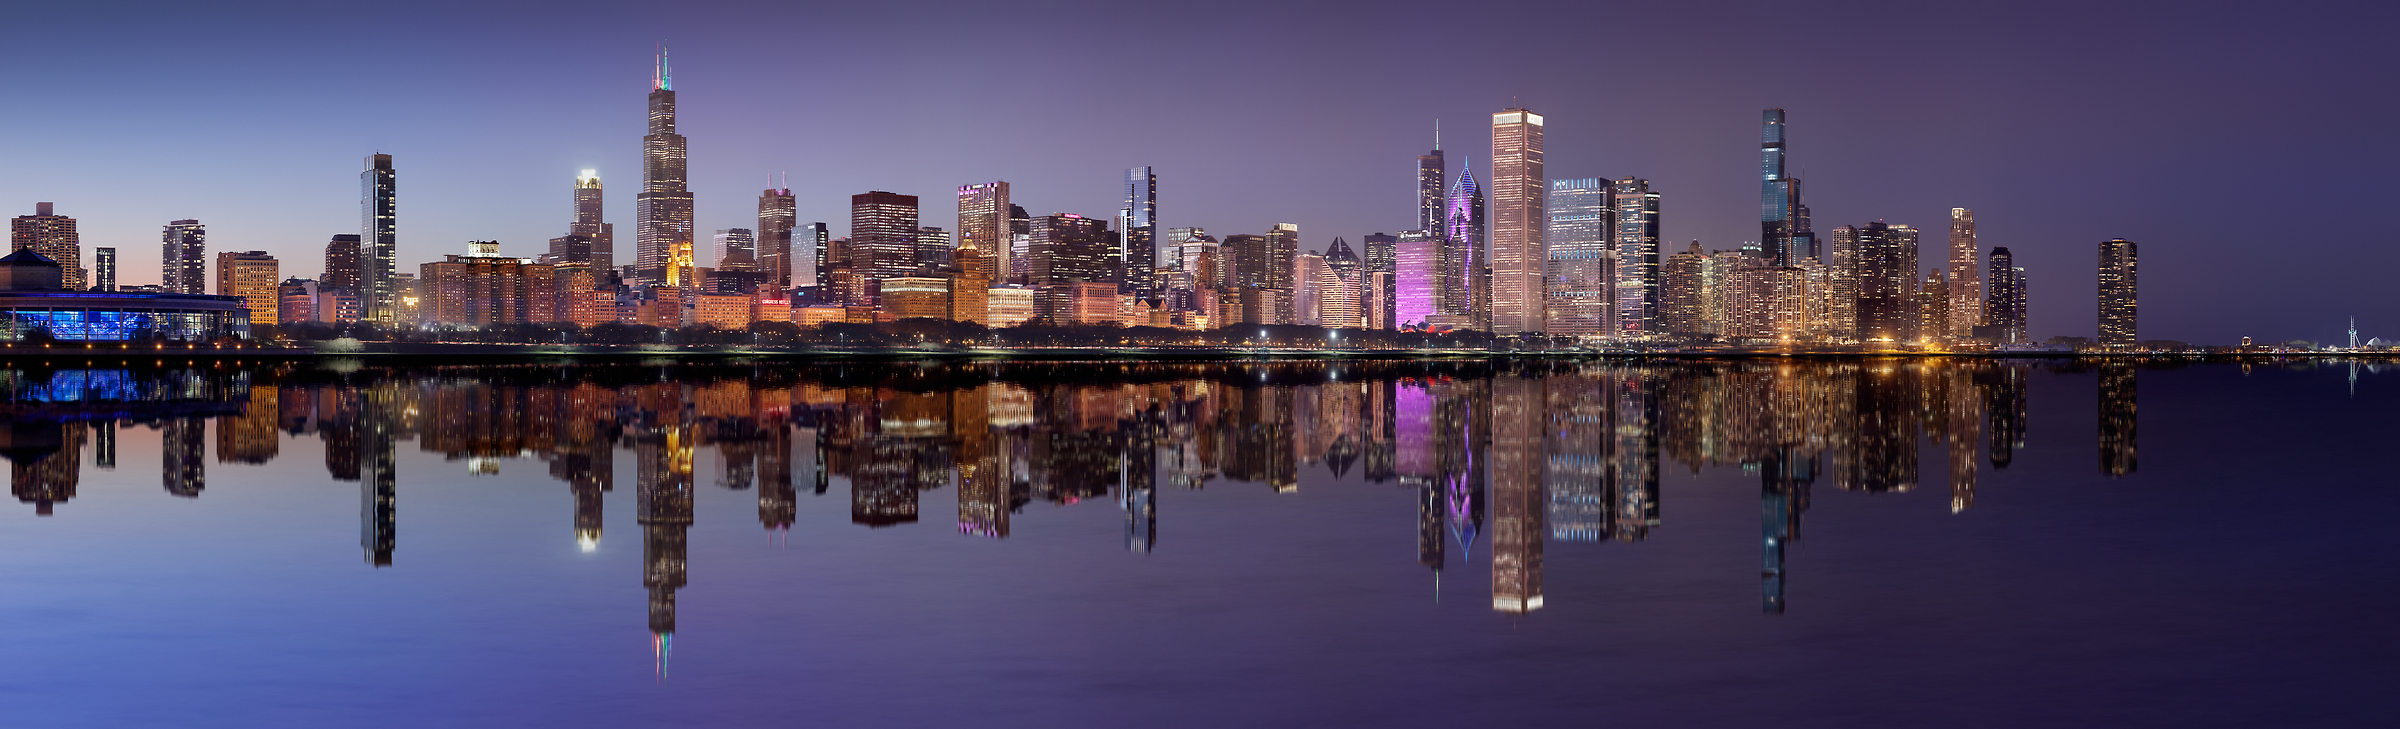 1,185 megapixels! A very high resolution, large-format VAST photo print of the Chicago skyline at night with Lake Michigan in the foreground; cityscape photograph created by Phil Crawshay in Chicago, Illinois